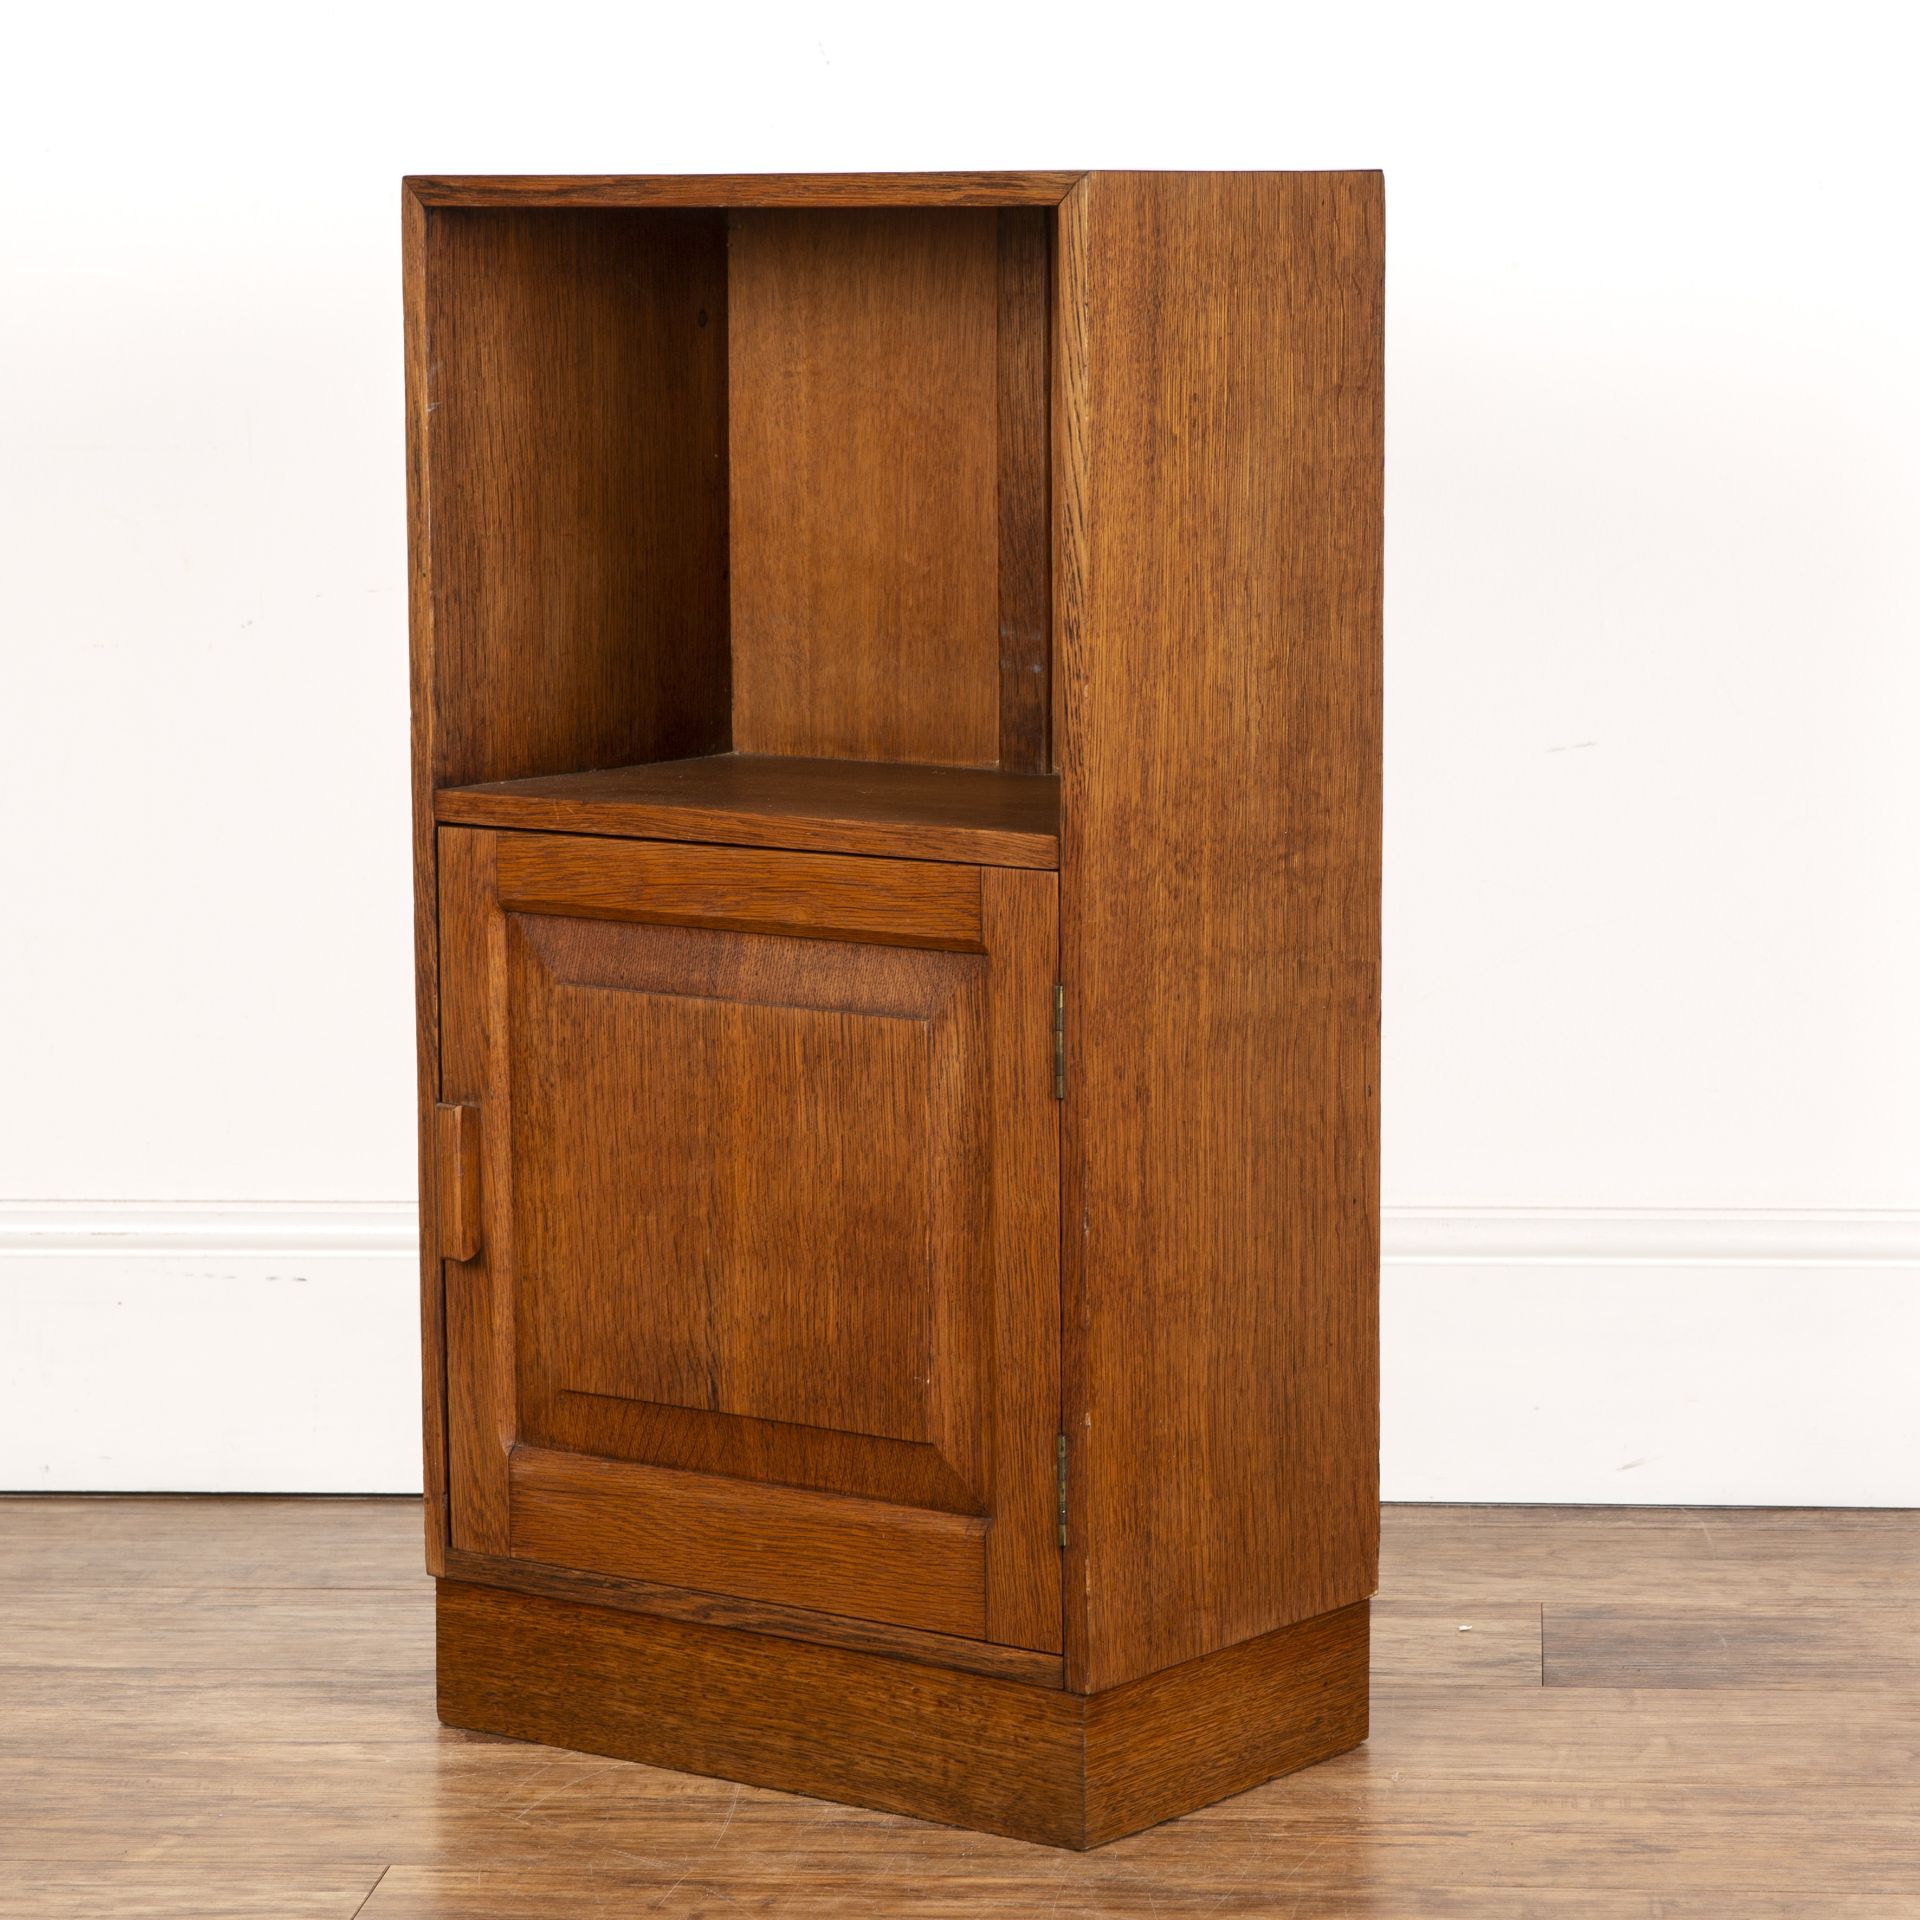 Attributed to Heals oak, small cupboard or bedside table, with open shelf above a fielded panel - Image 4 of 5